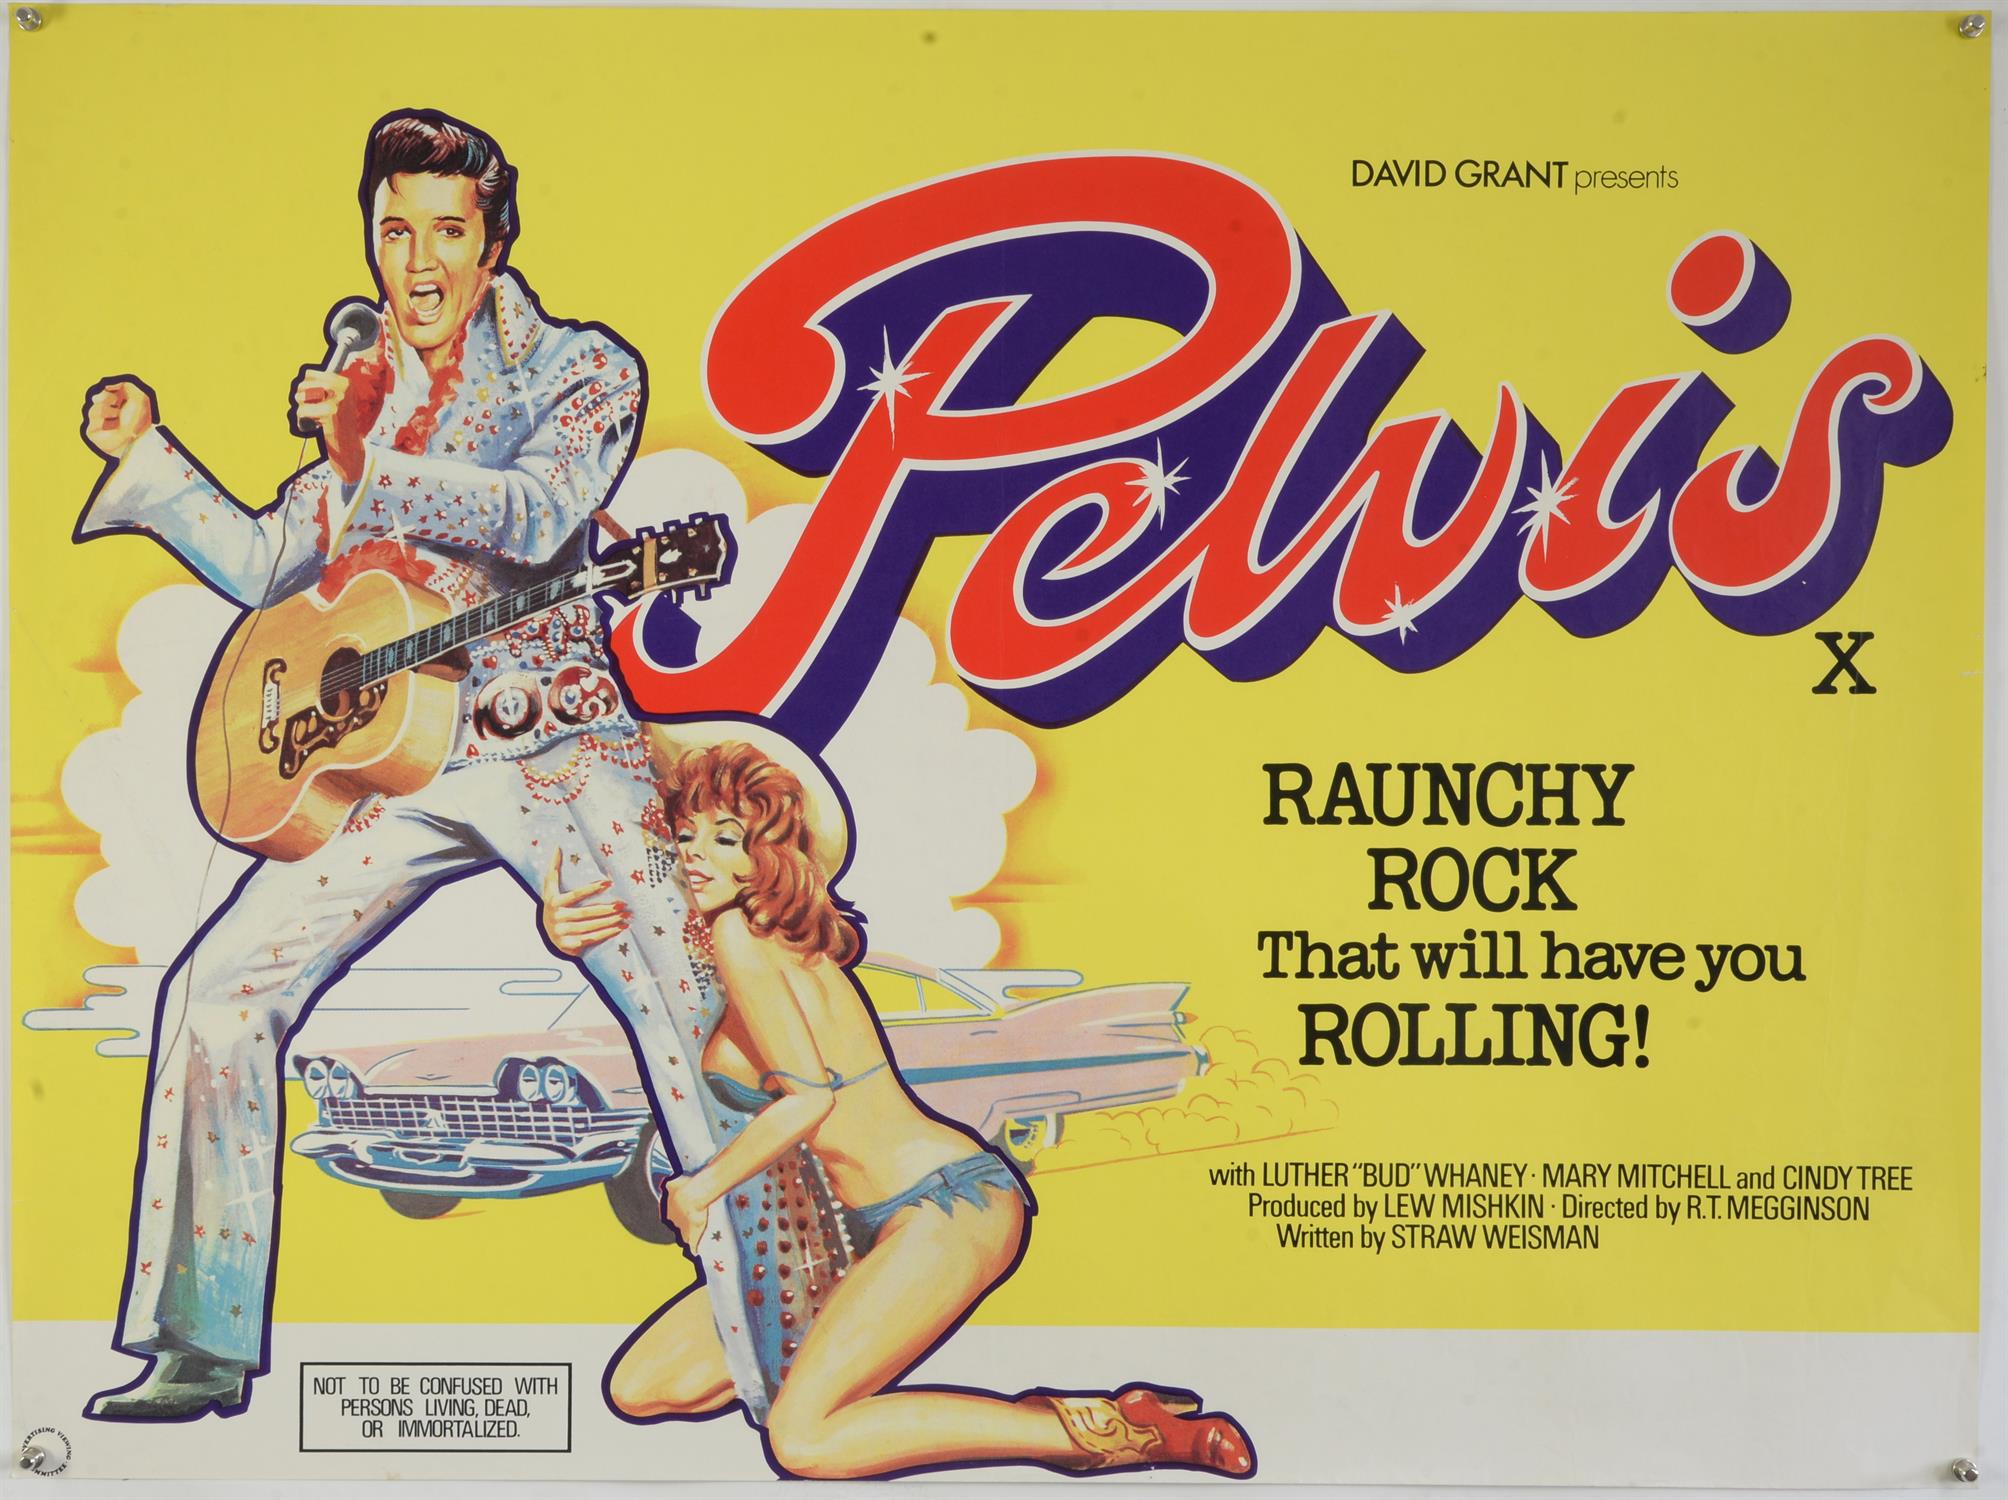 Pelvis (1977) British Quad film poster for the musical-comedy clearly referencing Elvis Presley,